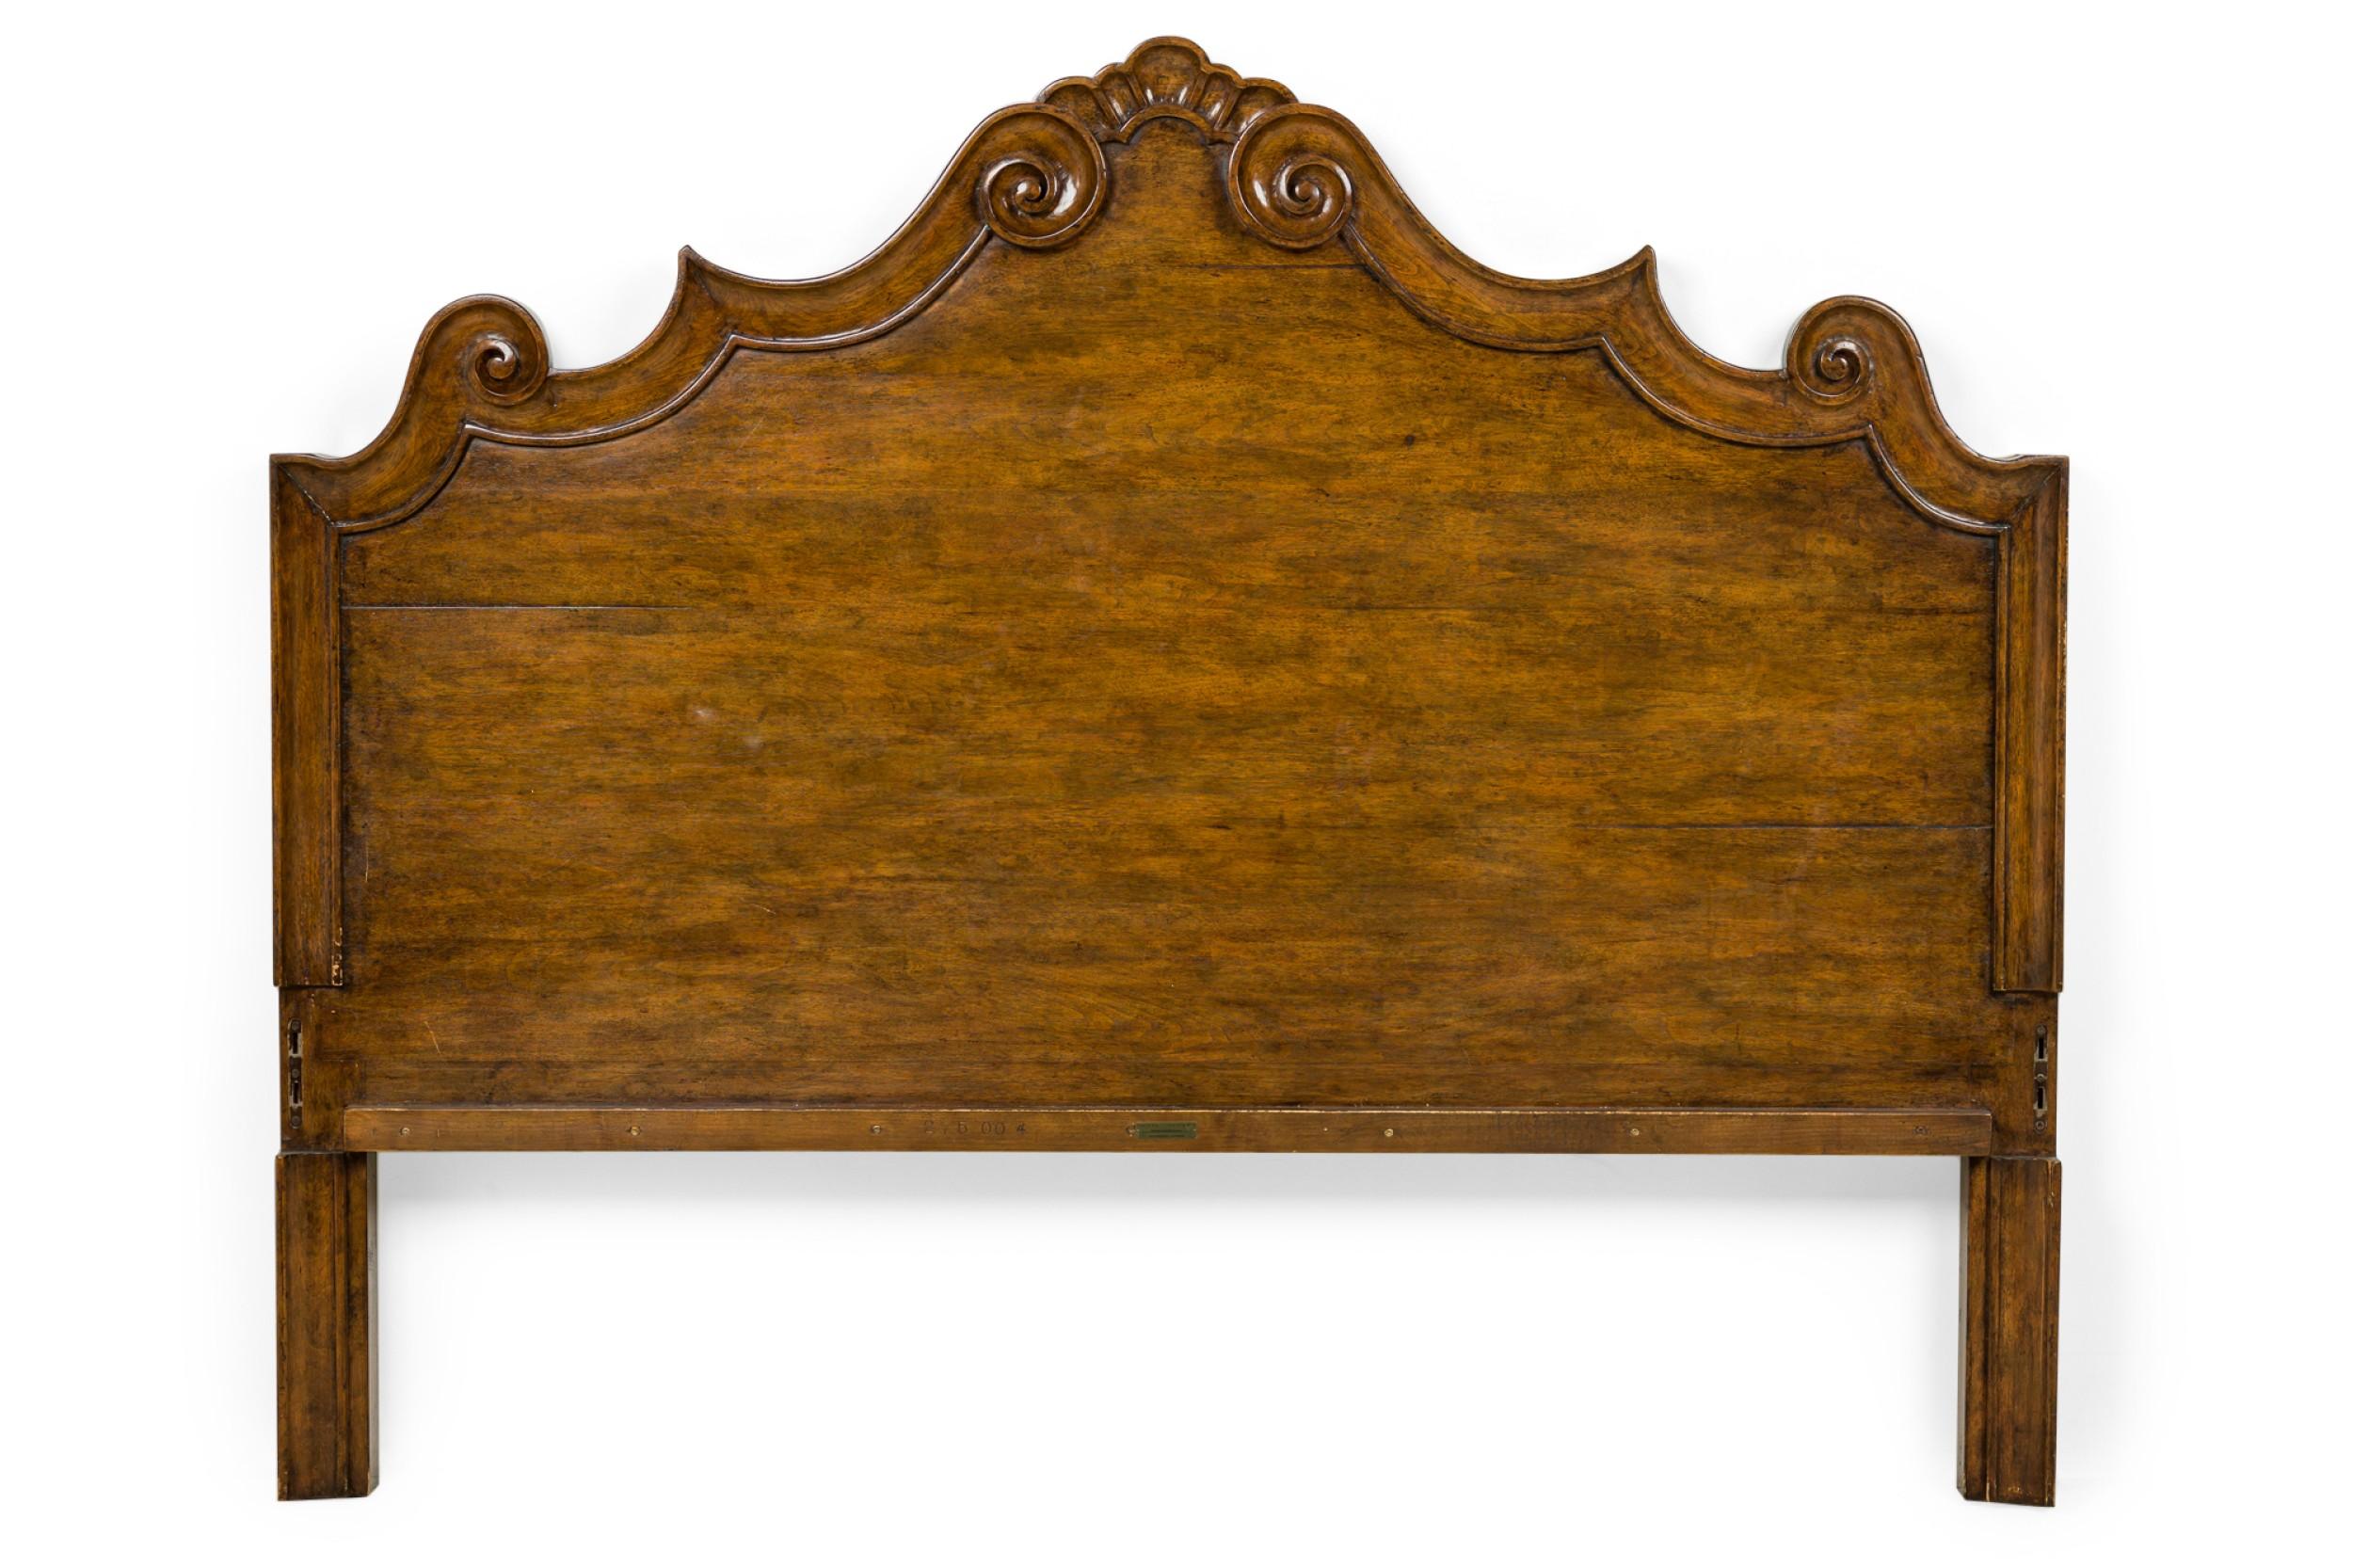 French Provincal style (20th Century) walnut king size bed with a shaped design to the headboard with a scroll and center carved shell design (headboard, footboard, 2 rails) (MICHAEL TAYLOR DESIGN)
 

 Condition: Some wear to finish from age & use